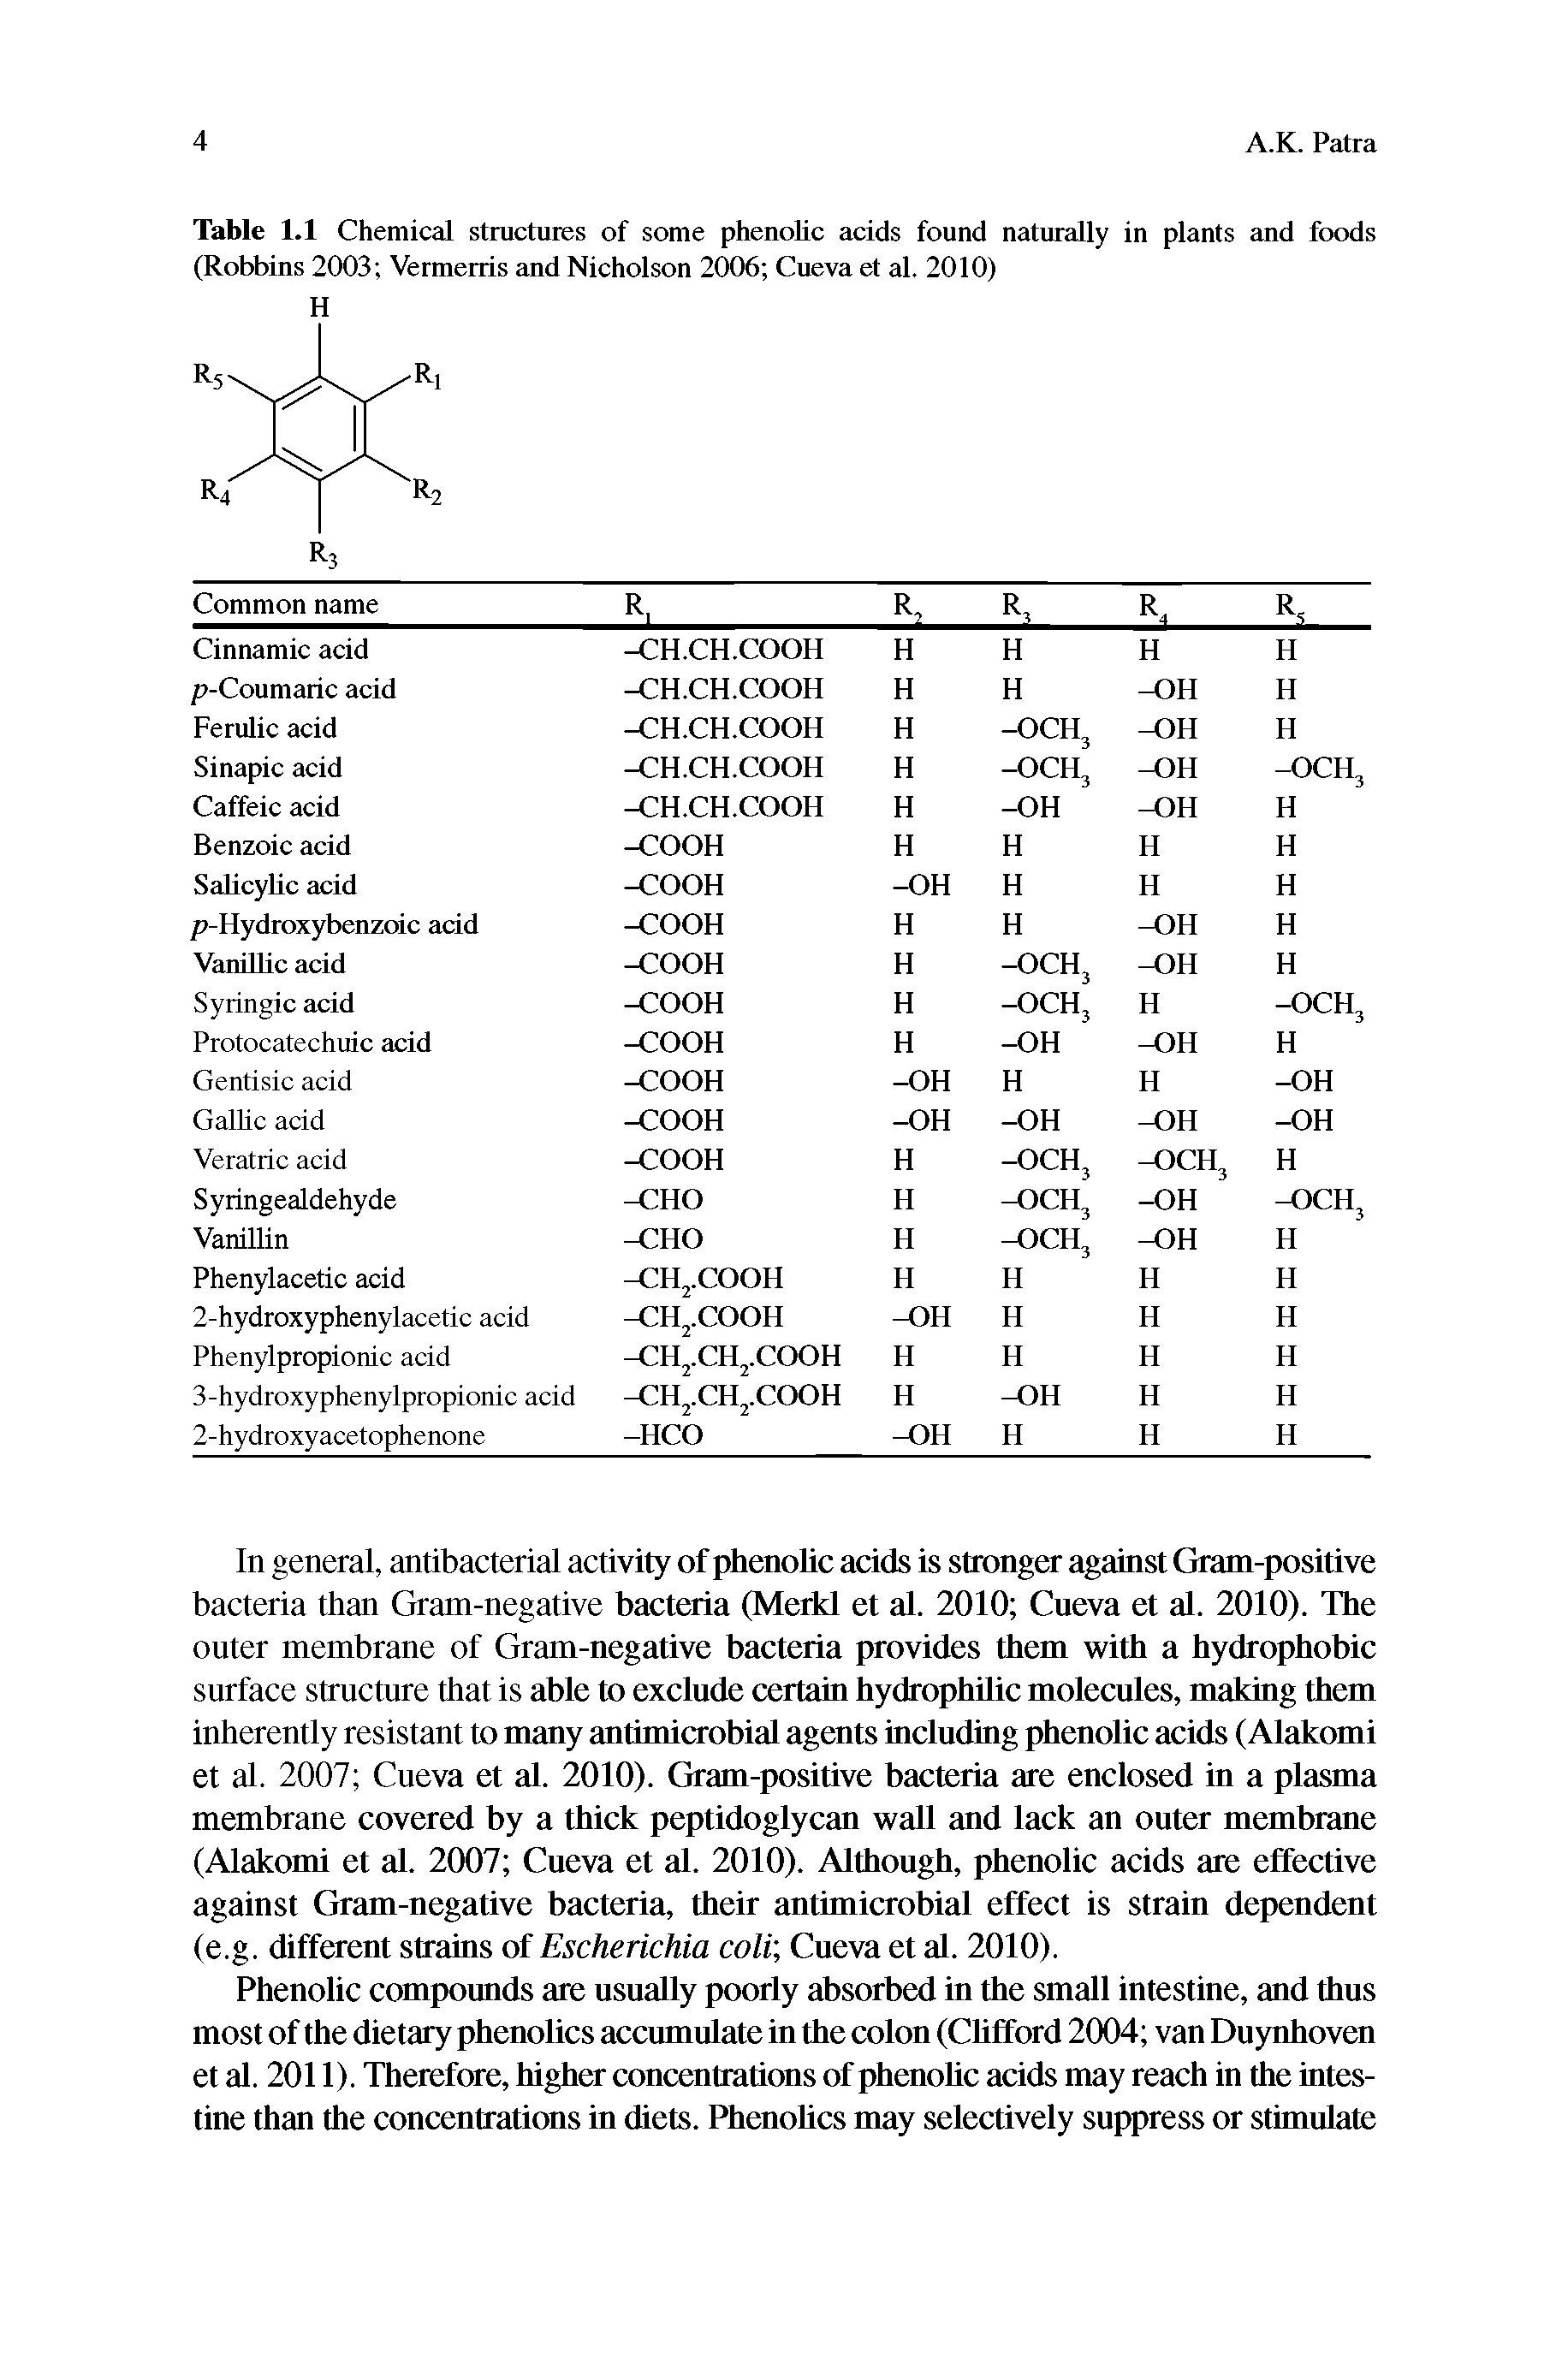 Table 1.1 Chemical structures of some phenolic acids found naturally in plants and foods (Robbins 2003 Vermerris and Nicholson 2006 Cueva et eil. 2010)...